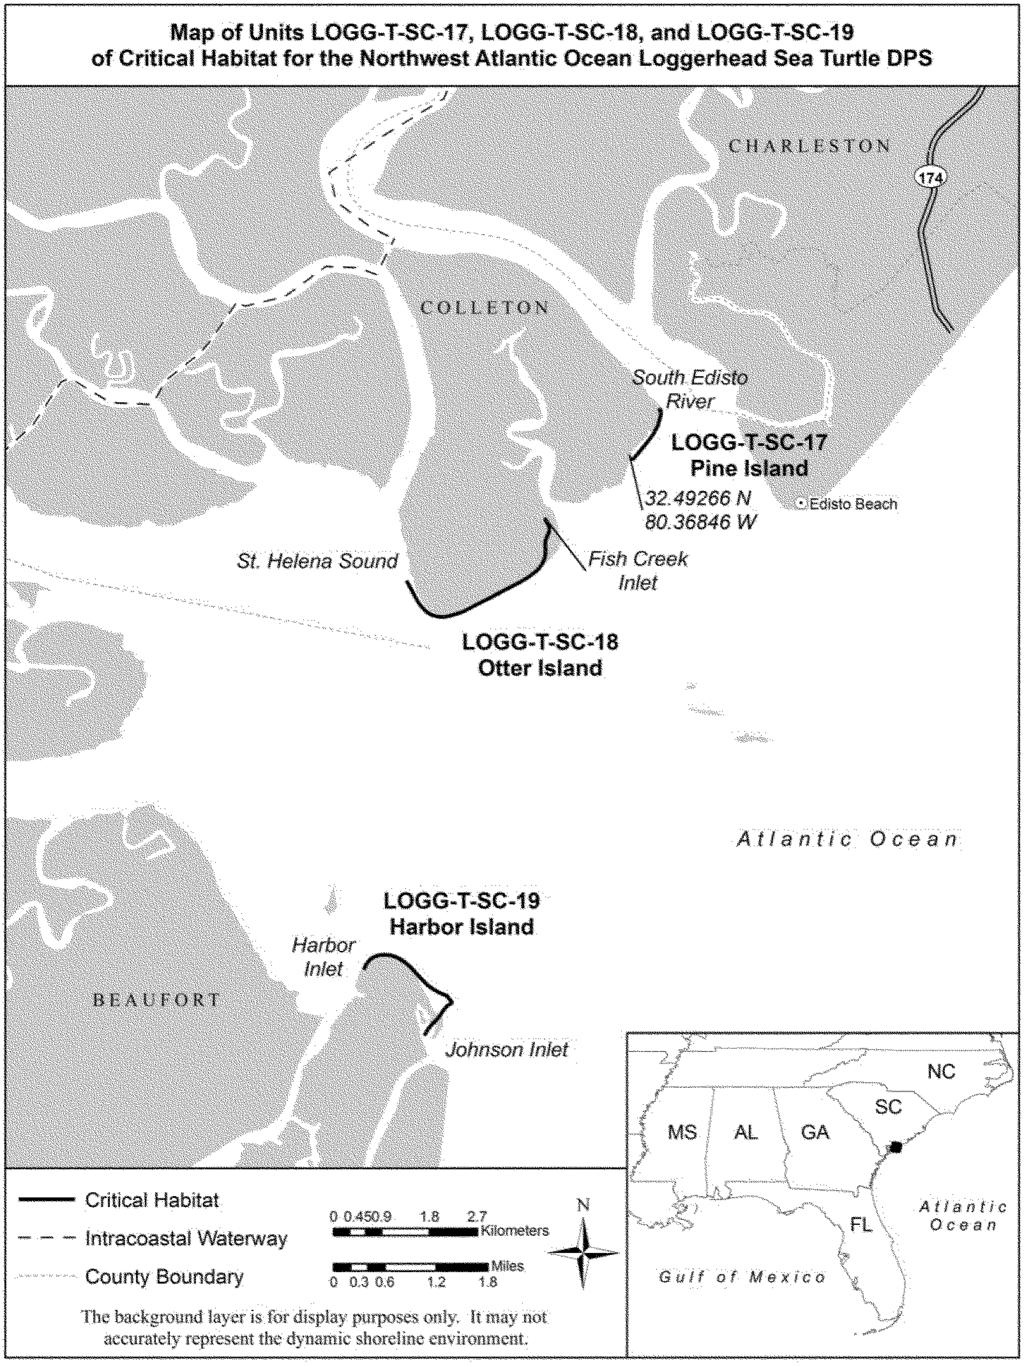 Federal Register / Vol. 78, No. 57 / Monday, March 25, 2013 / Proposed Rules 18057 (3) LOGG T SC 19 Harbor Island: This unit consists of 2.9 km (1.